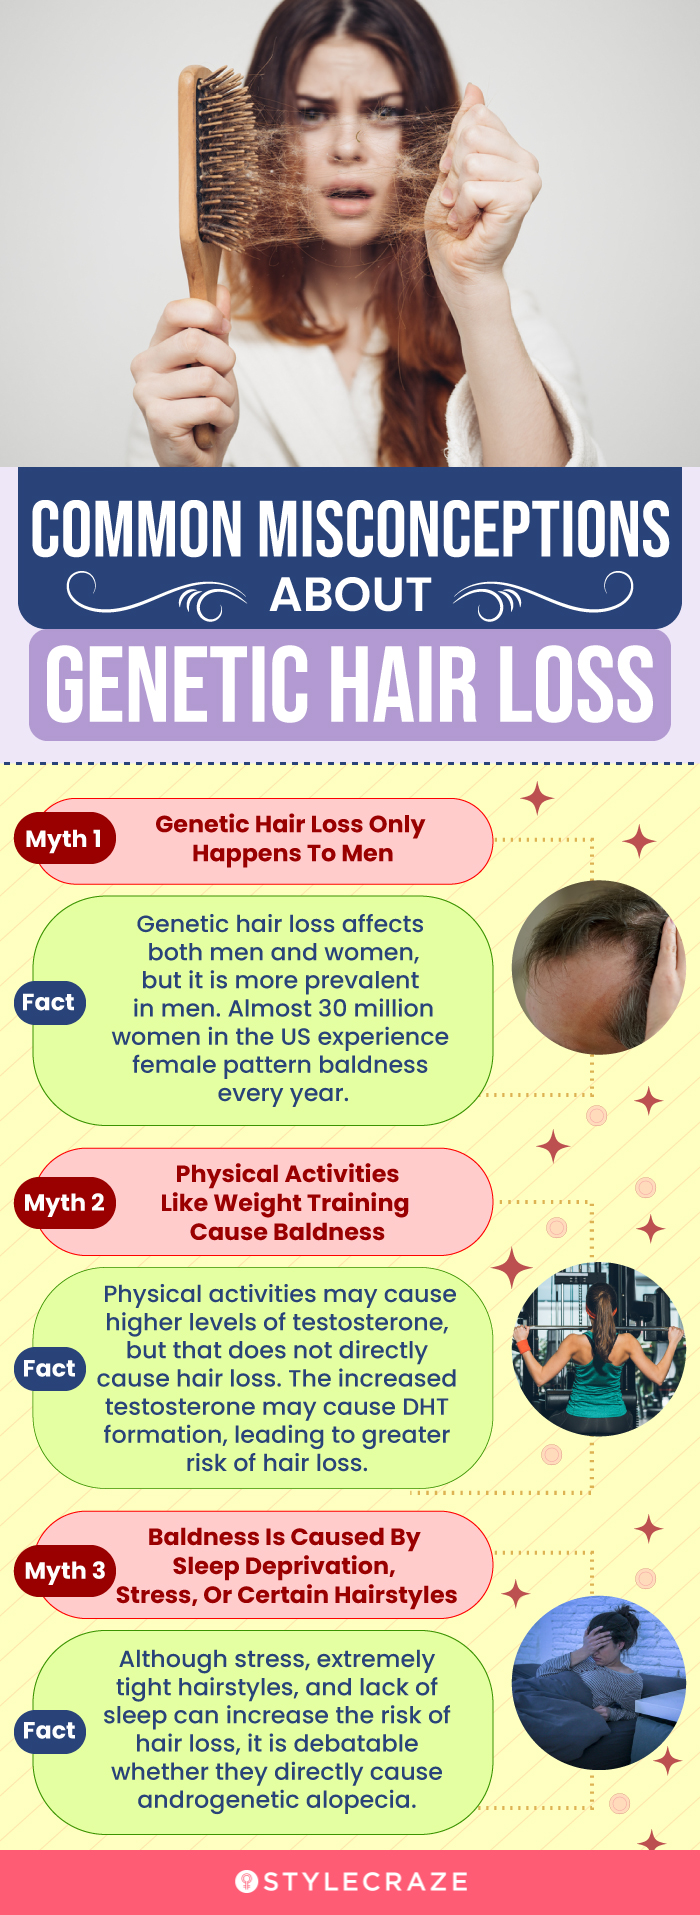 common misconceptions about genetic hair loss (infographic)